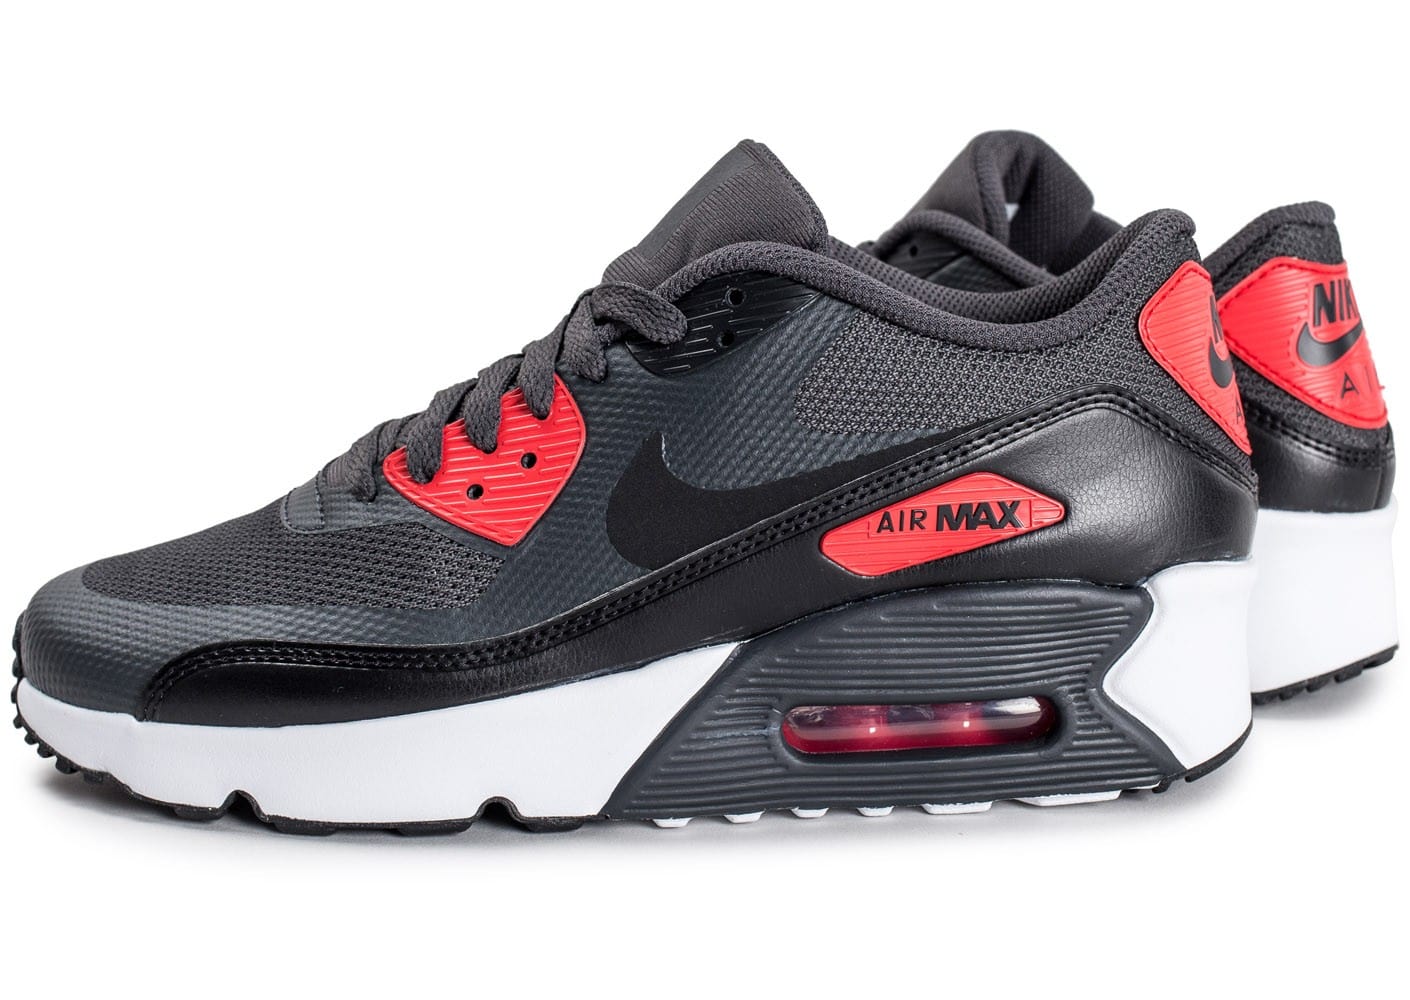 nike air max 90 le chaussures, Chaussures Nike Air Max 90 Ultra 2.0 Junior Anthracite et rouge